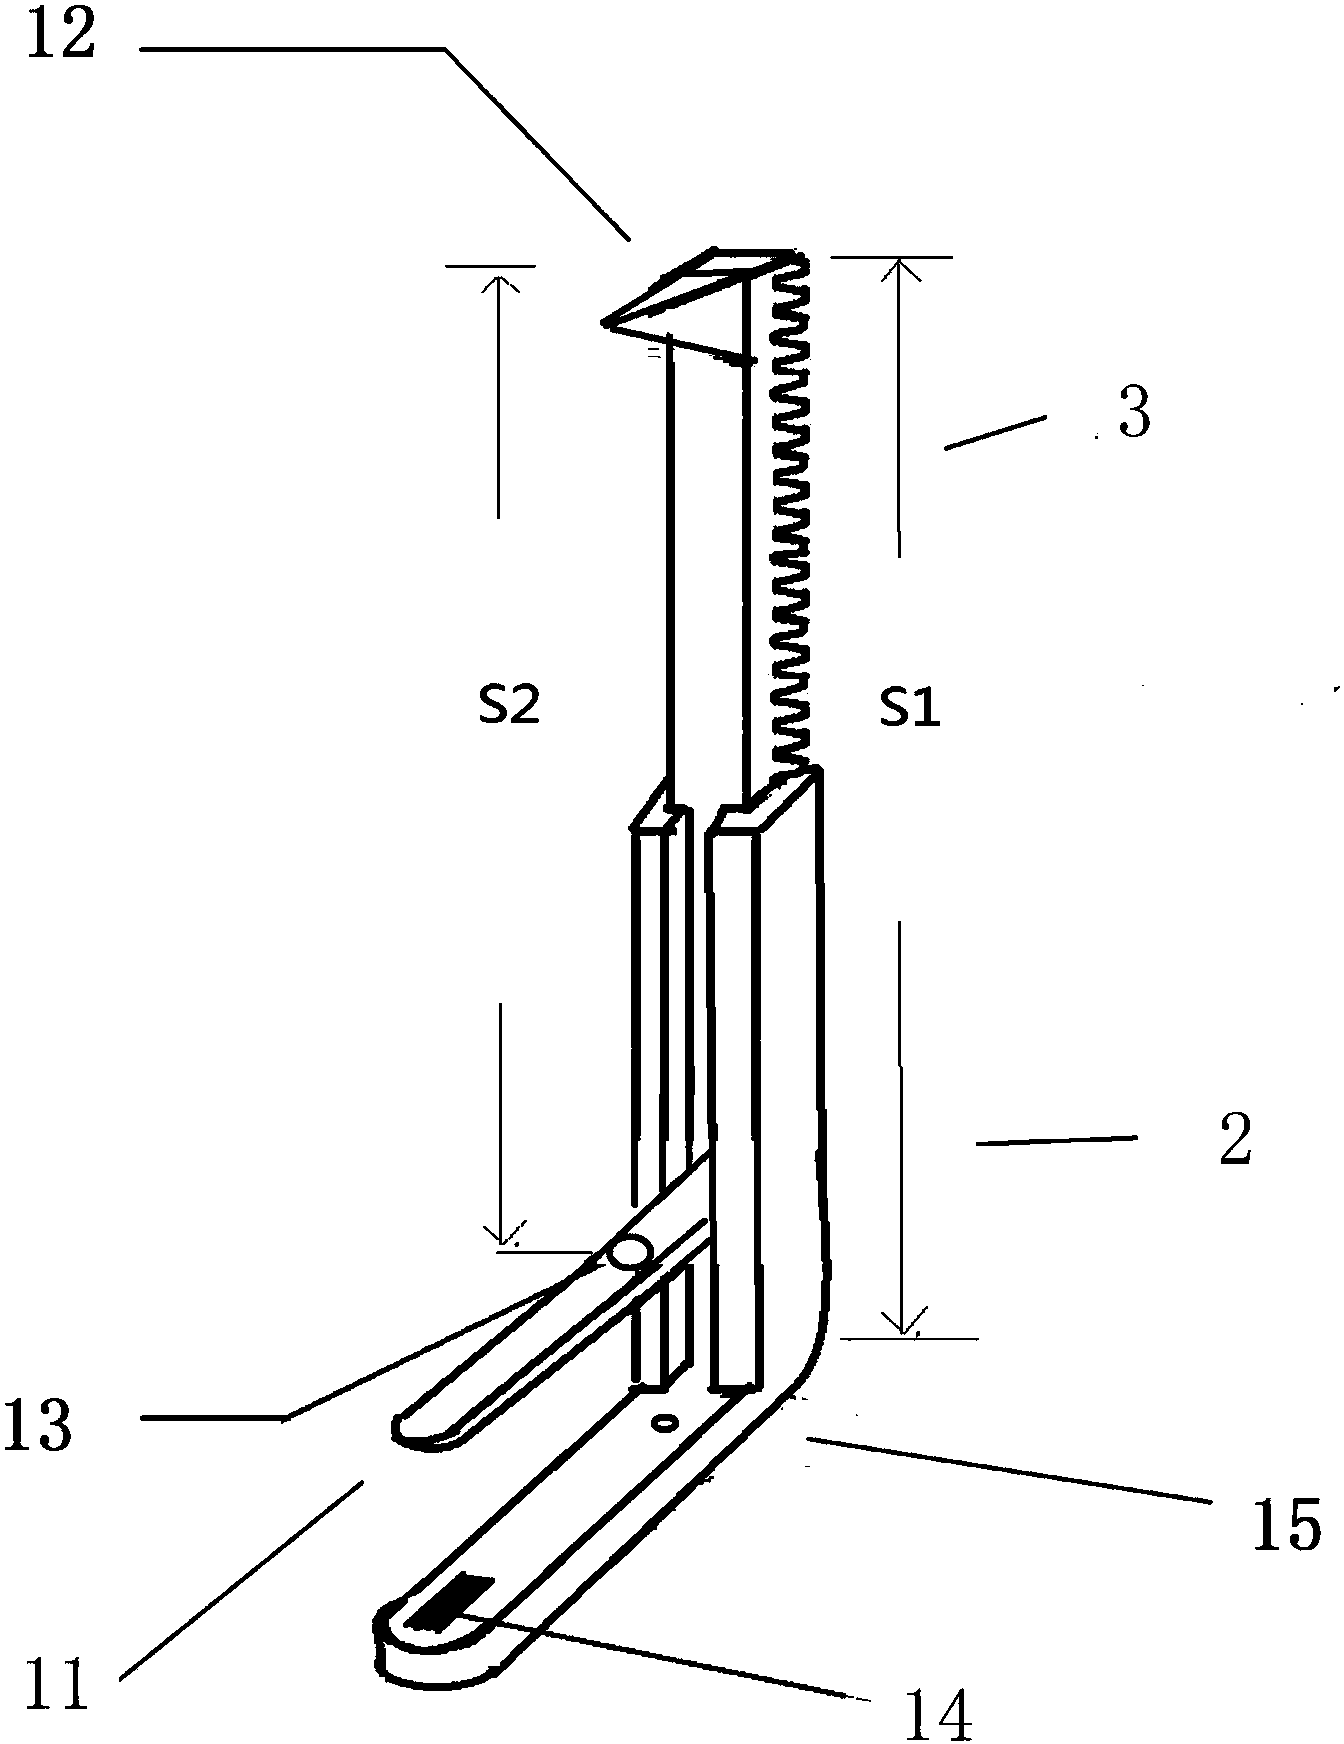 Animal spinal cord injury modeling device